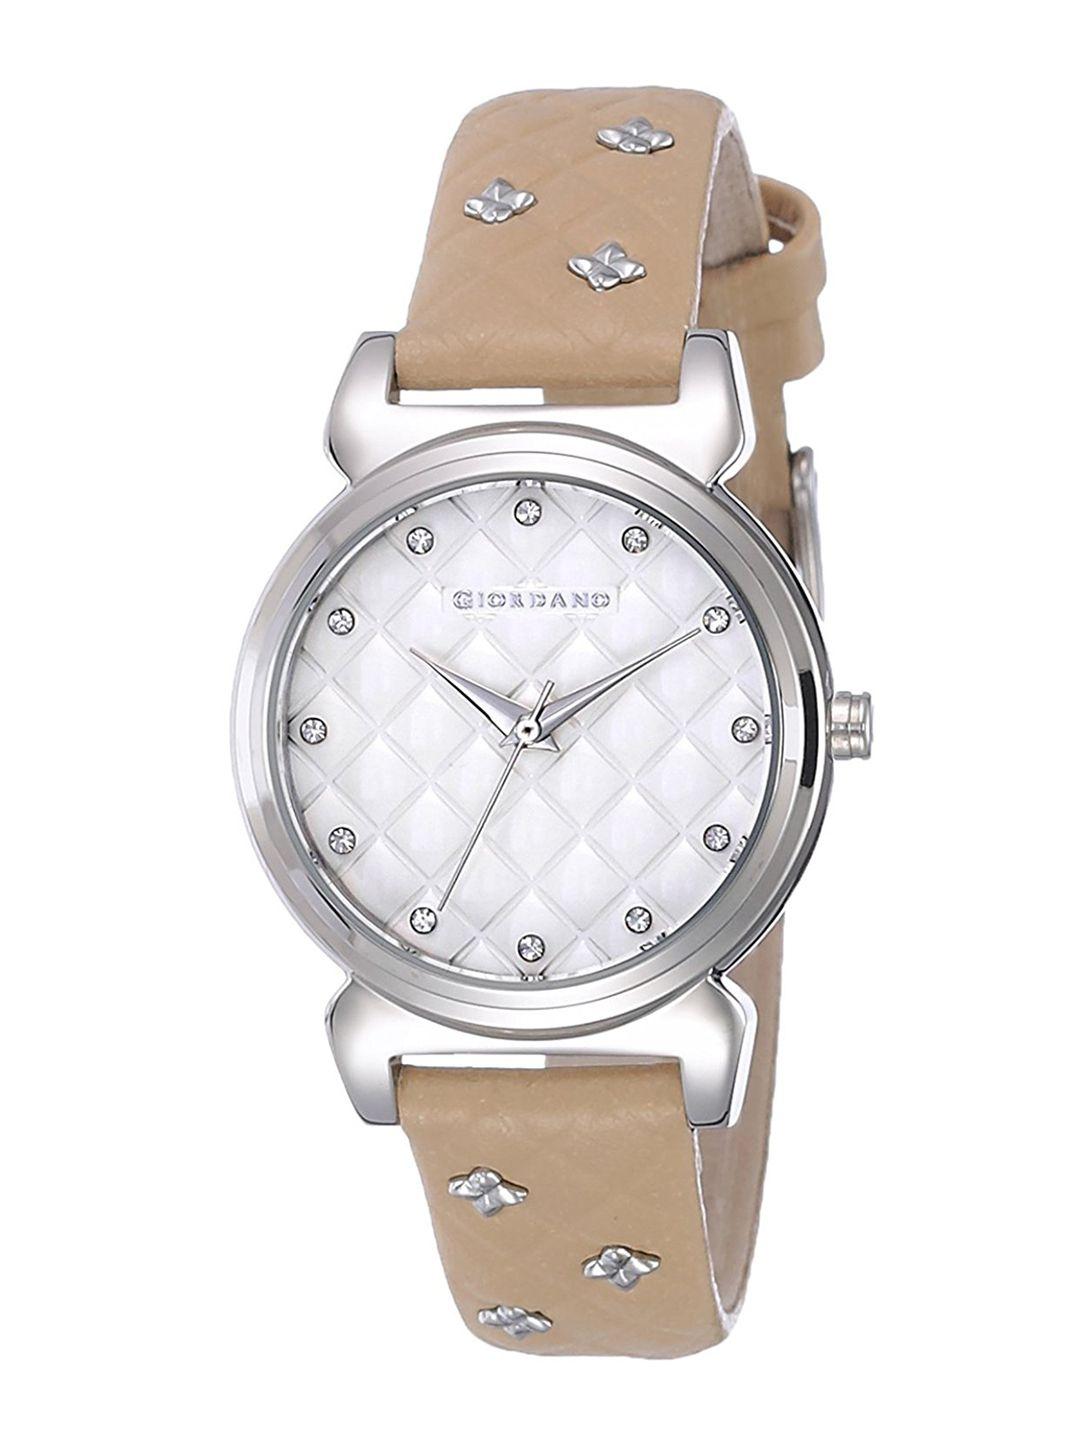 giordano women  embellished leather straps analogue watch 2794-01